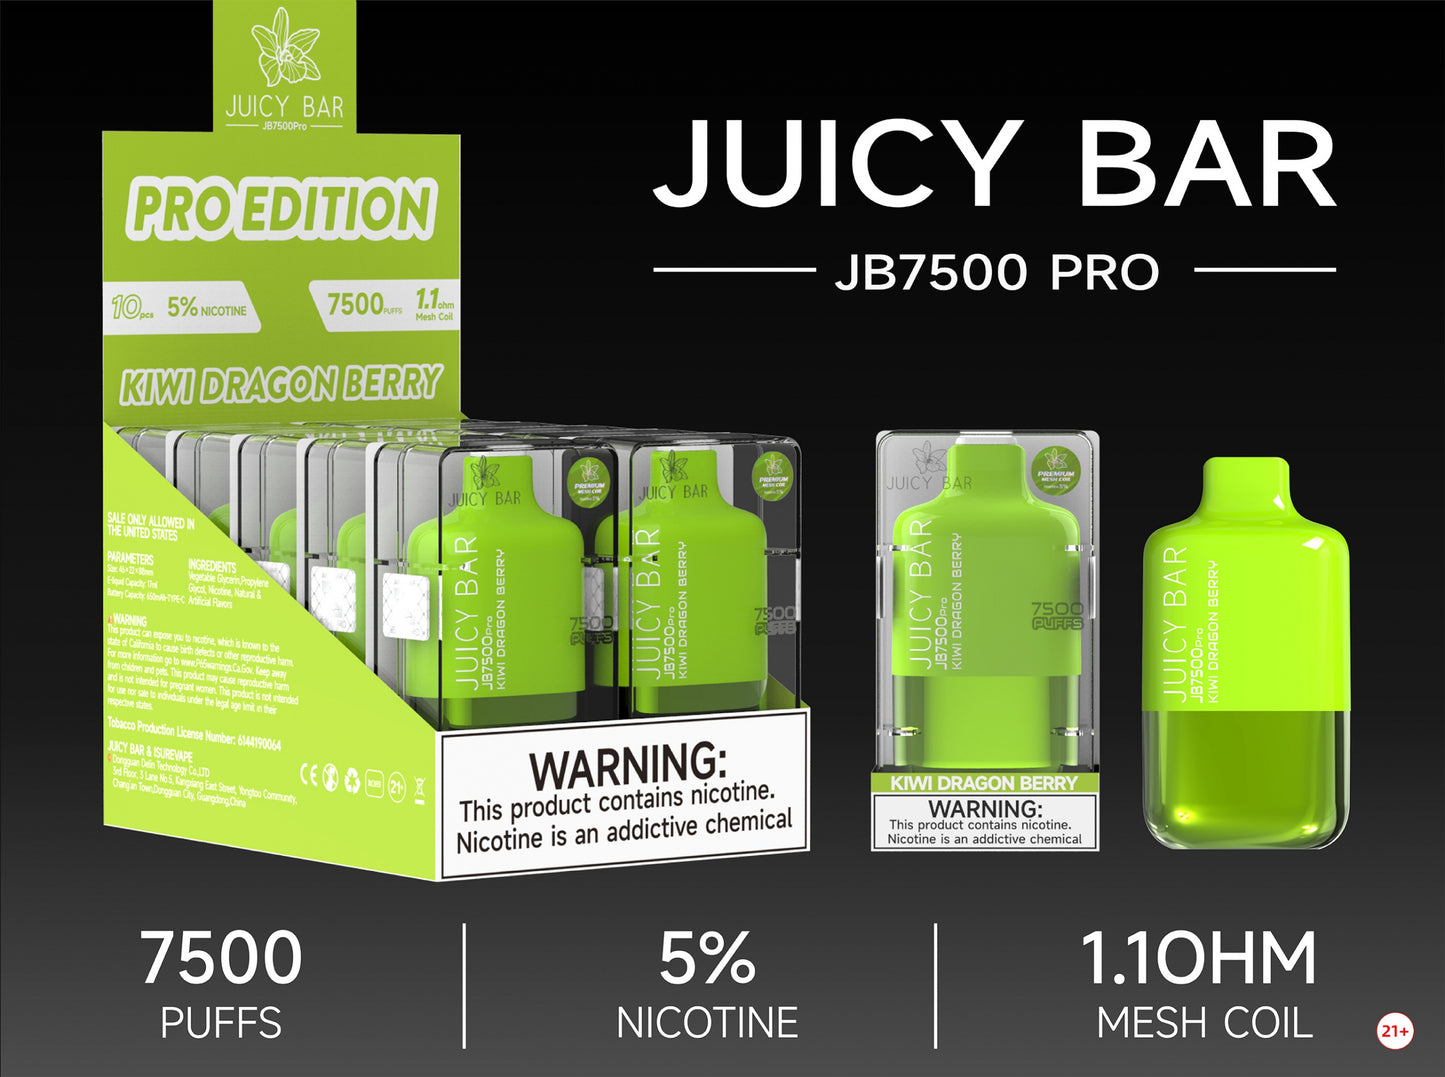 Juicy Bar Pro Edition 7500 Puffs 5% | Kiwi Dragon Berry with packaging